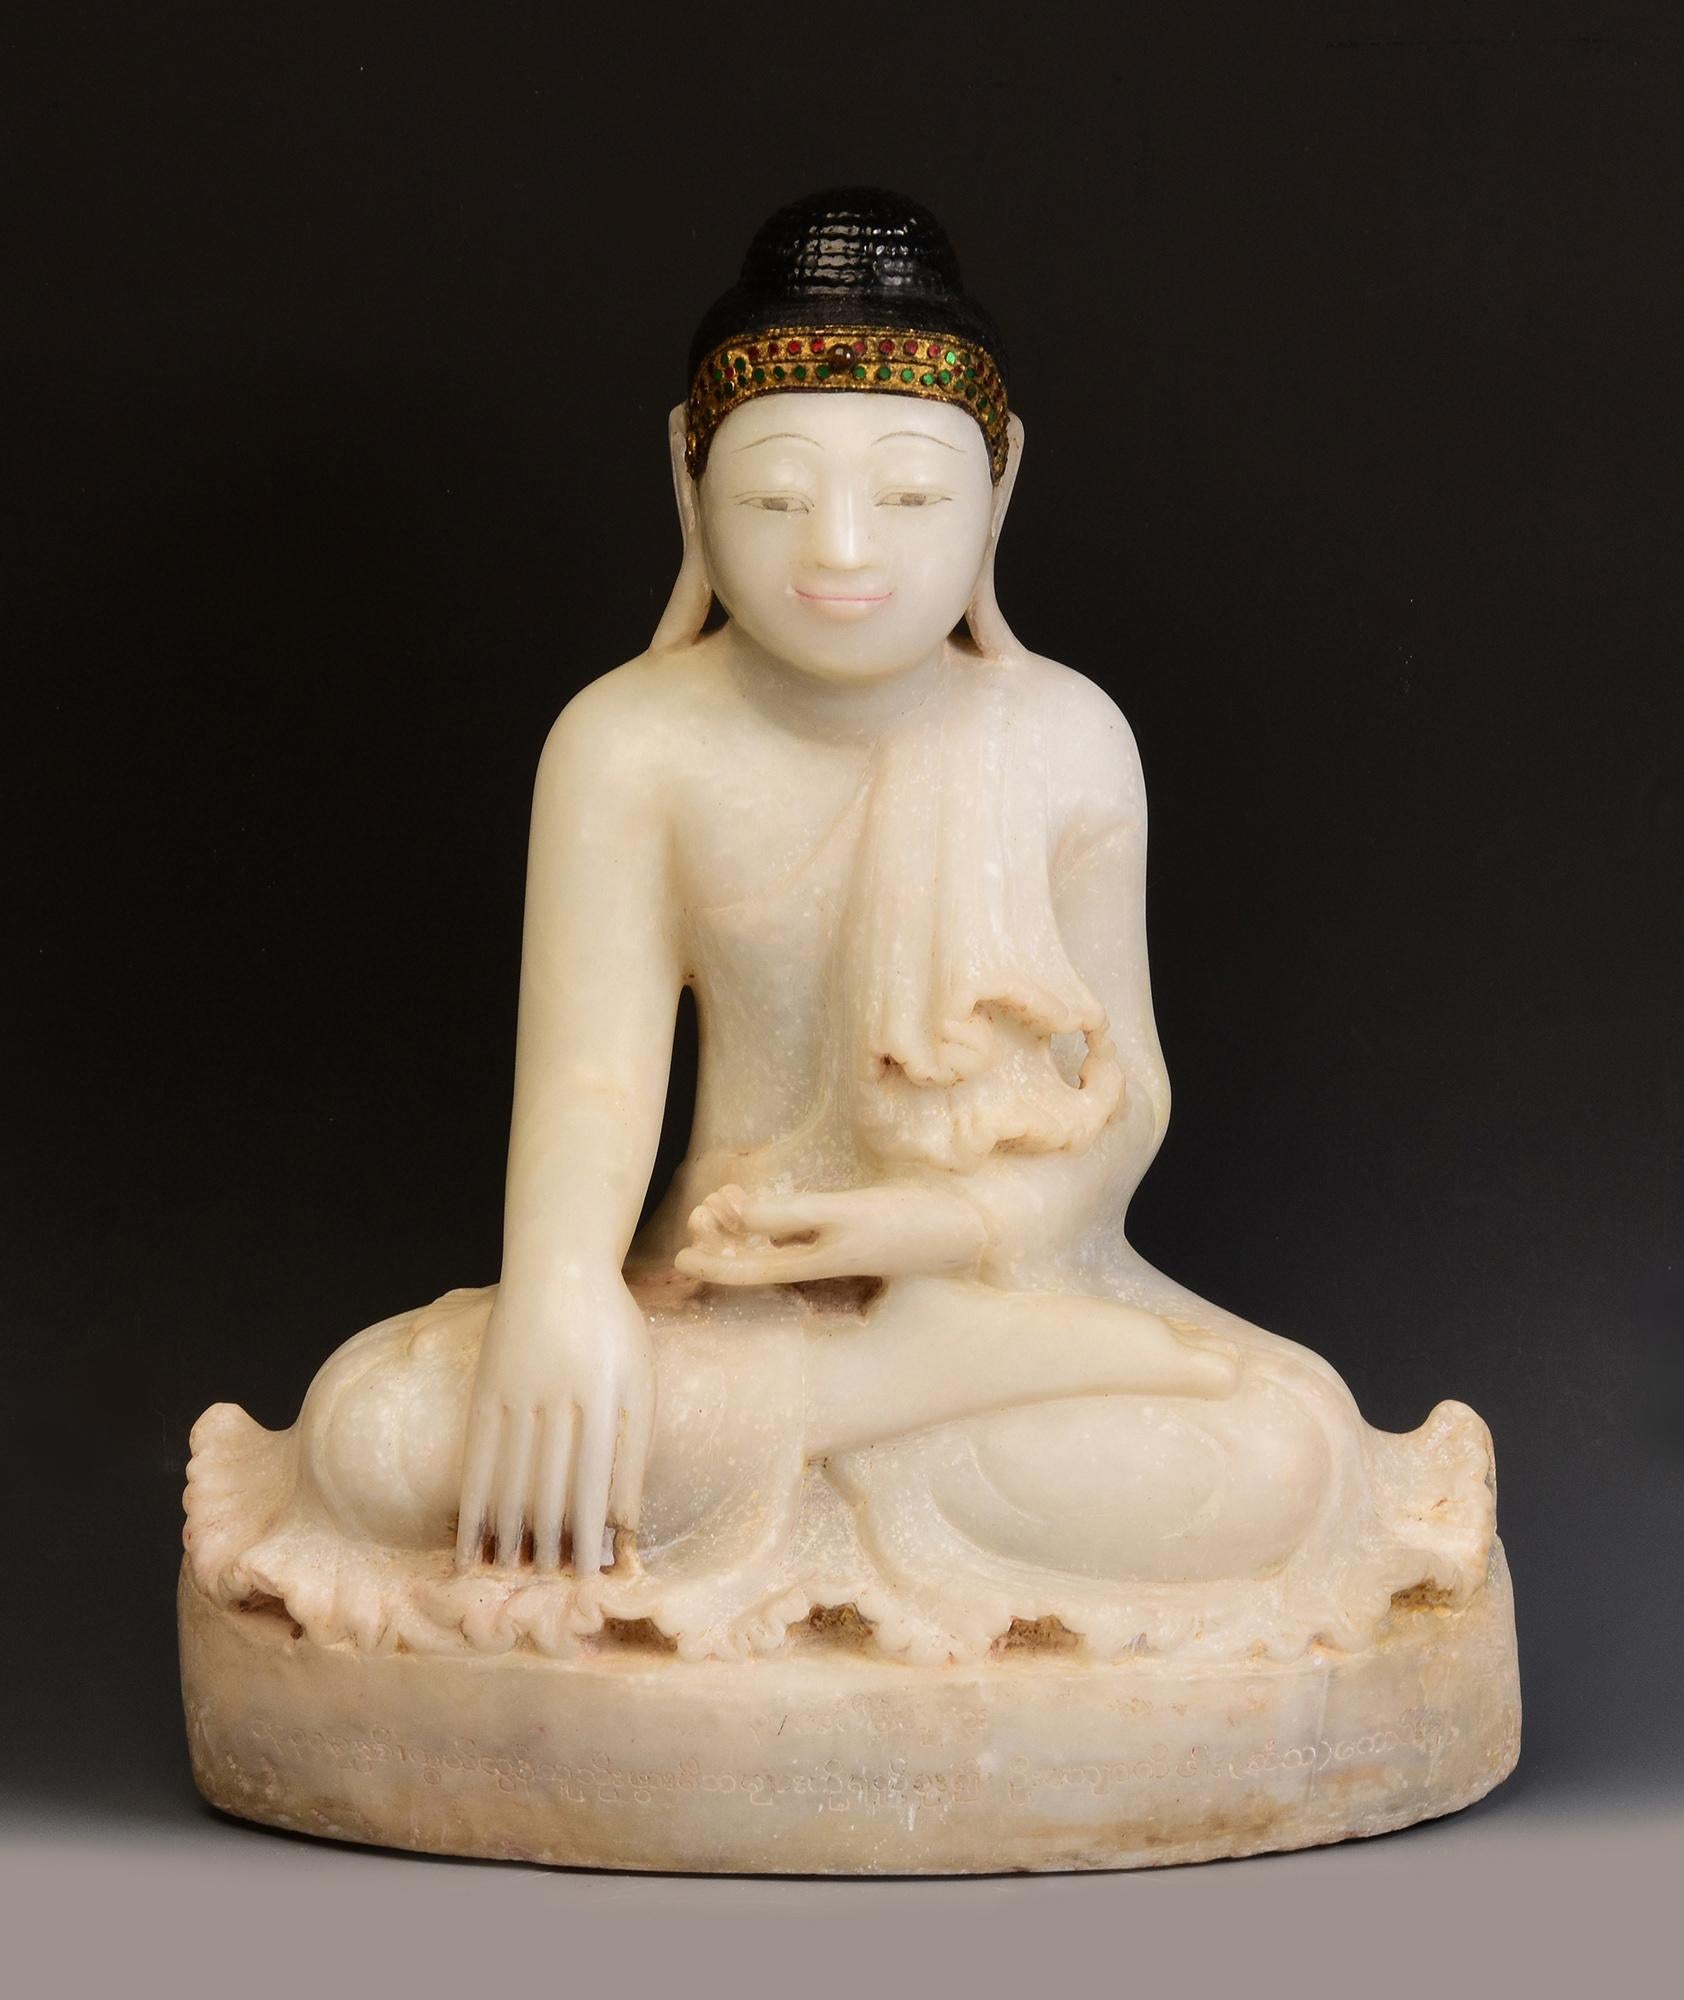 Antique Burmese alabaster Buddha sitting in Mara Vijaya (calling the earth to witness) posture on a base, with inlay of colorful glass pieces on the headband.

Age: Burma, Mandalay Period, 19th Century
Size: Height 54 C.M. / Width 44.5 C.M. / Depth